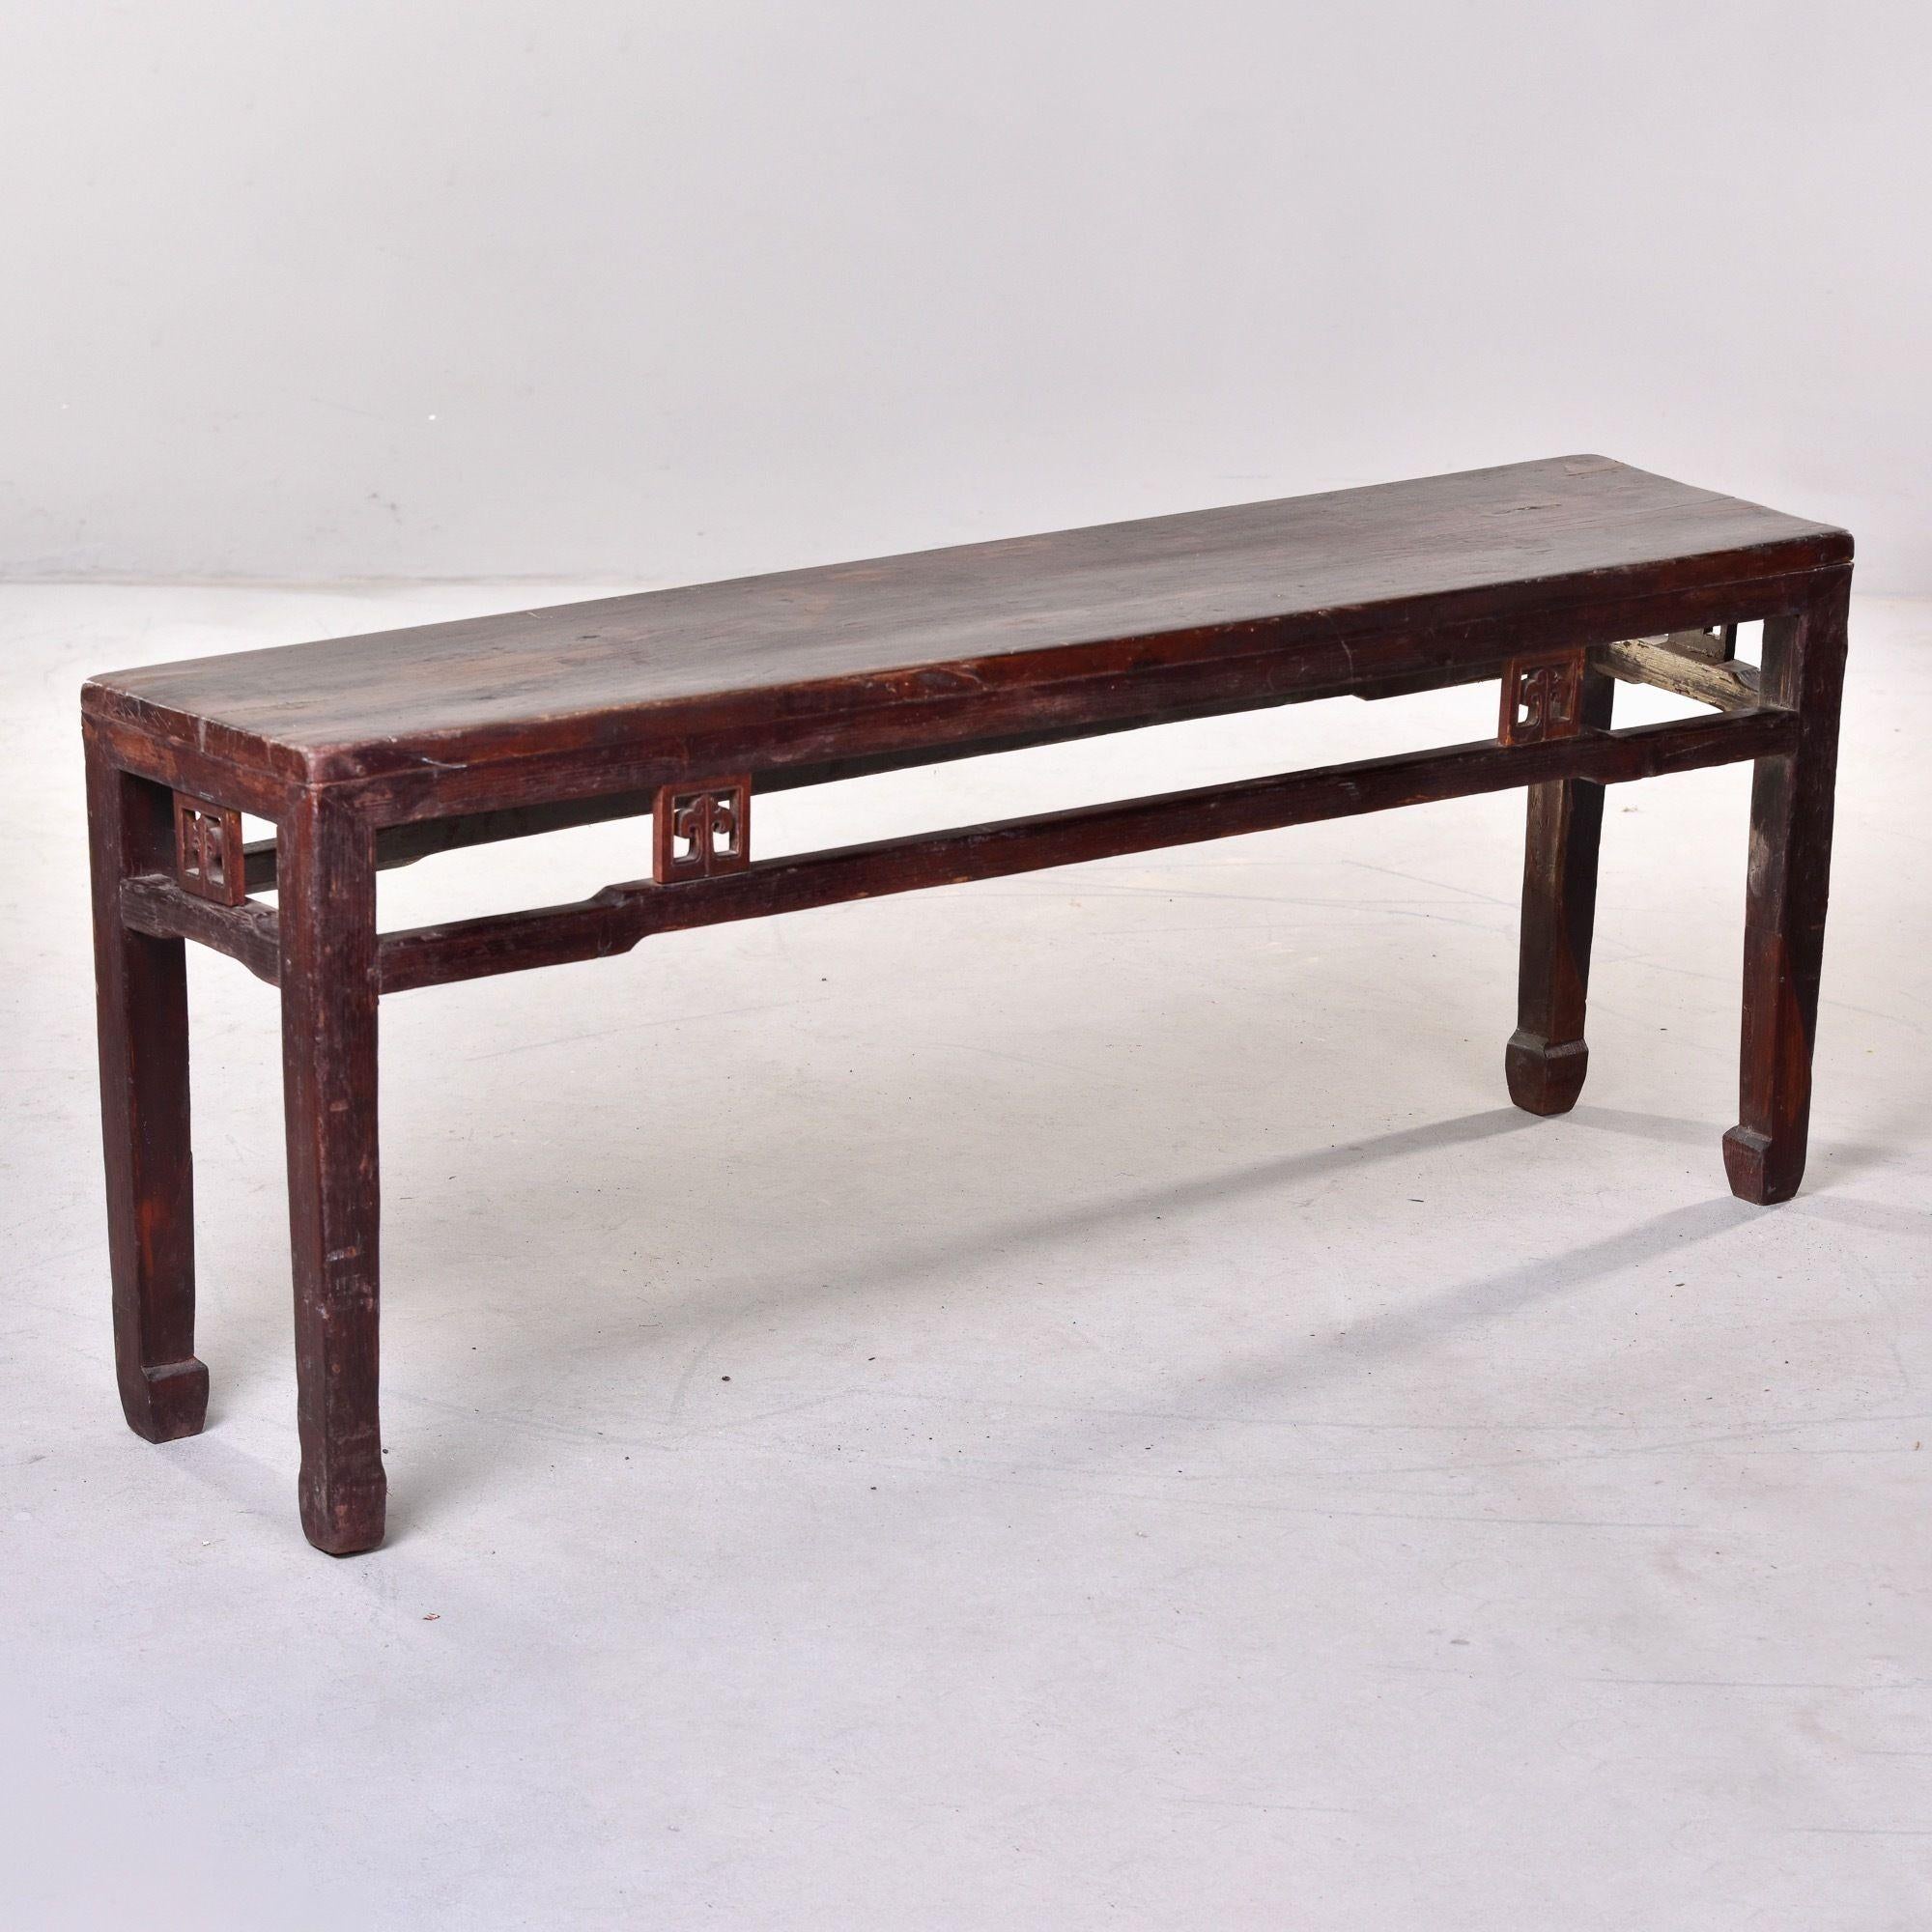 Early 20th C Extra Long Chinese Elm Wood Dong Yang Bench 3